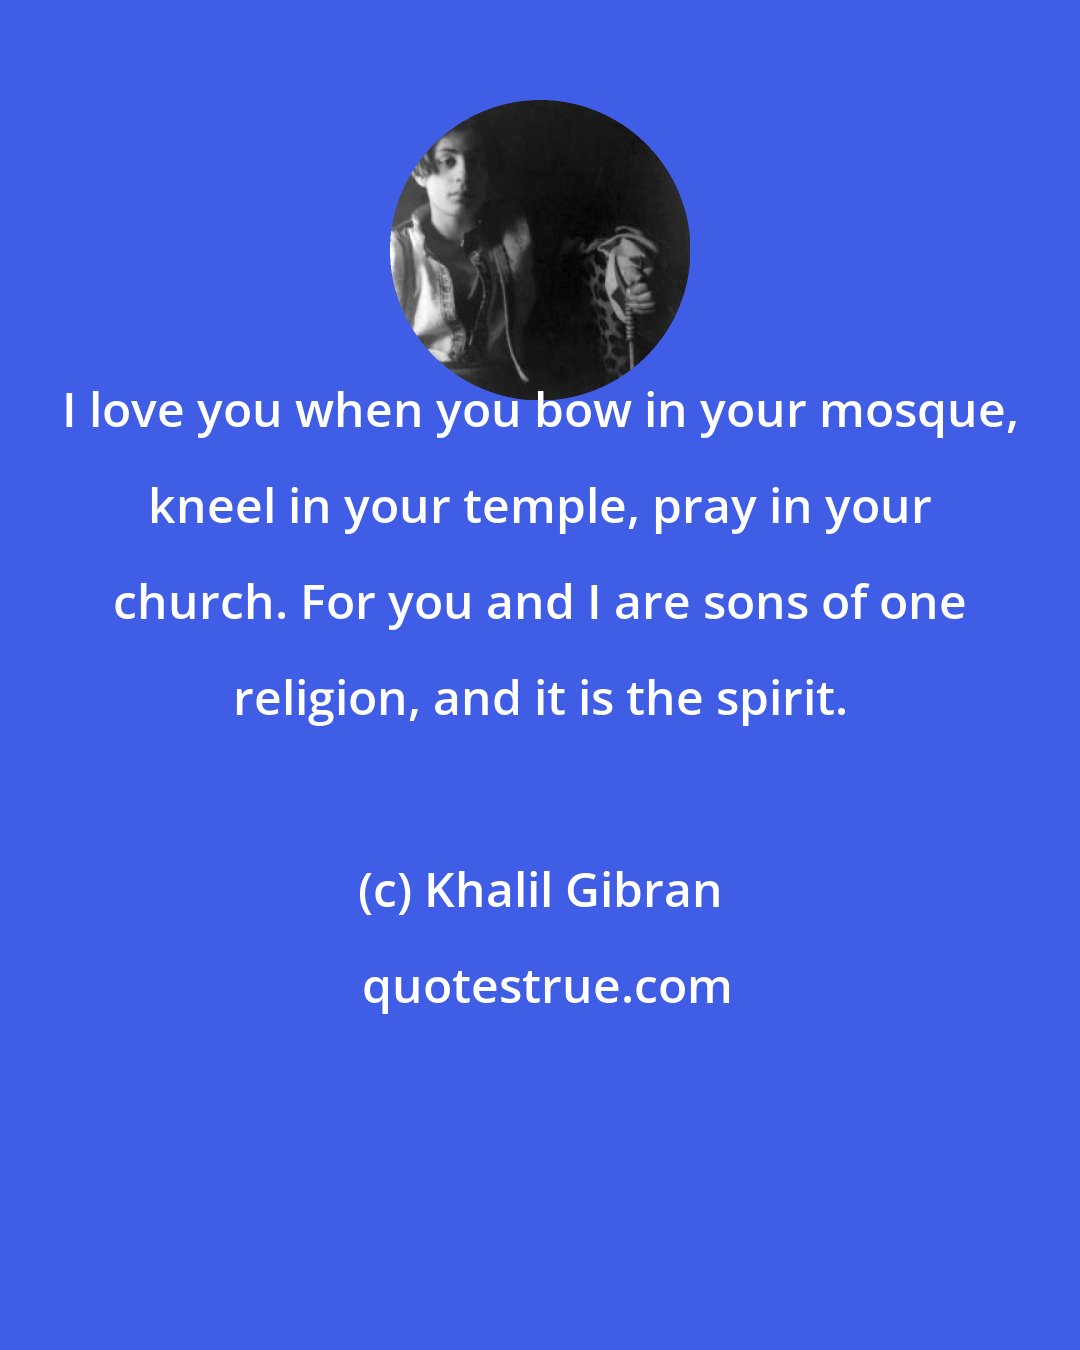 Khalil Gibran: I love you when you bow in your mosque, kneel in your temple, pray in your church. For you and I are sons of one religion, and it is the spirit.